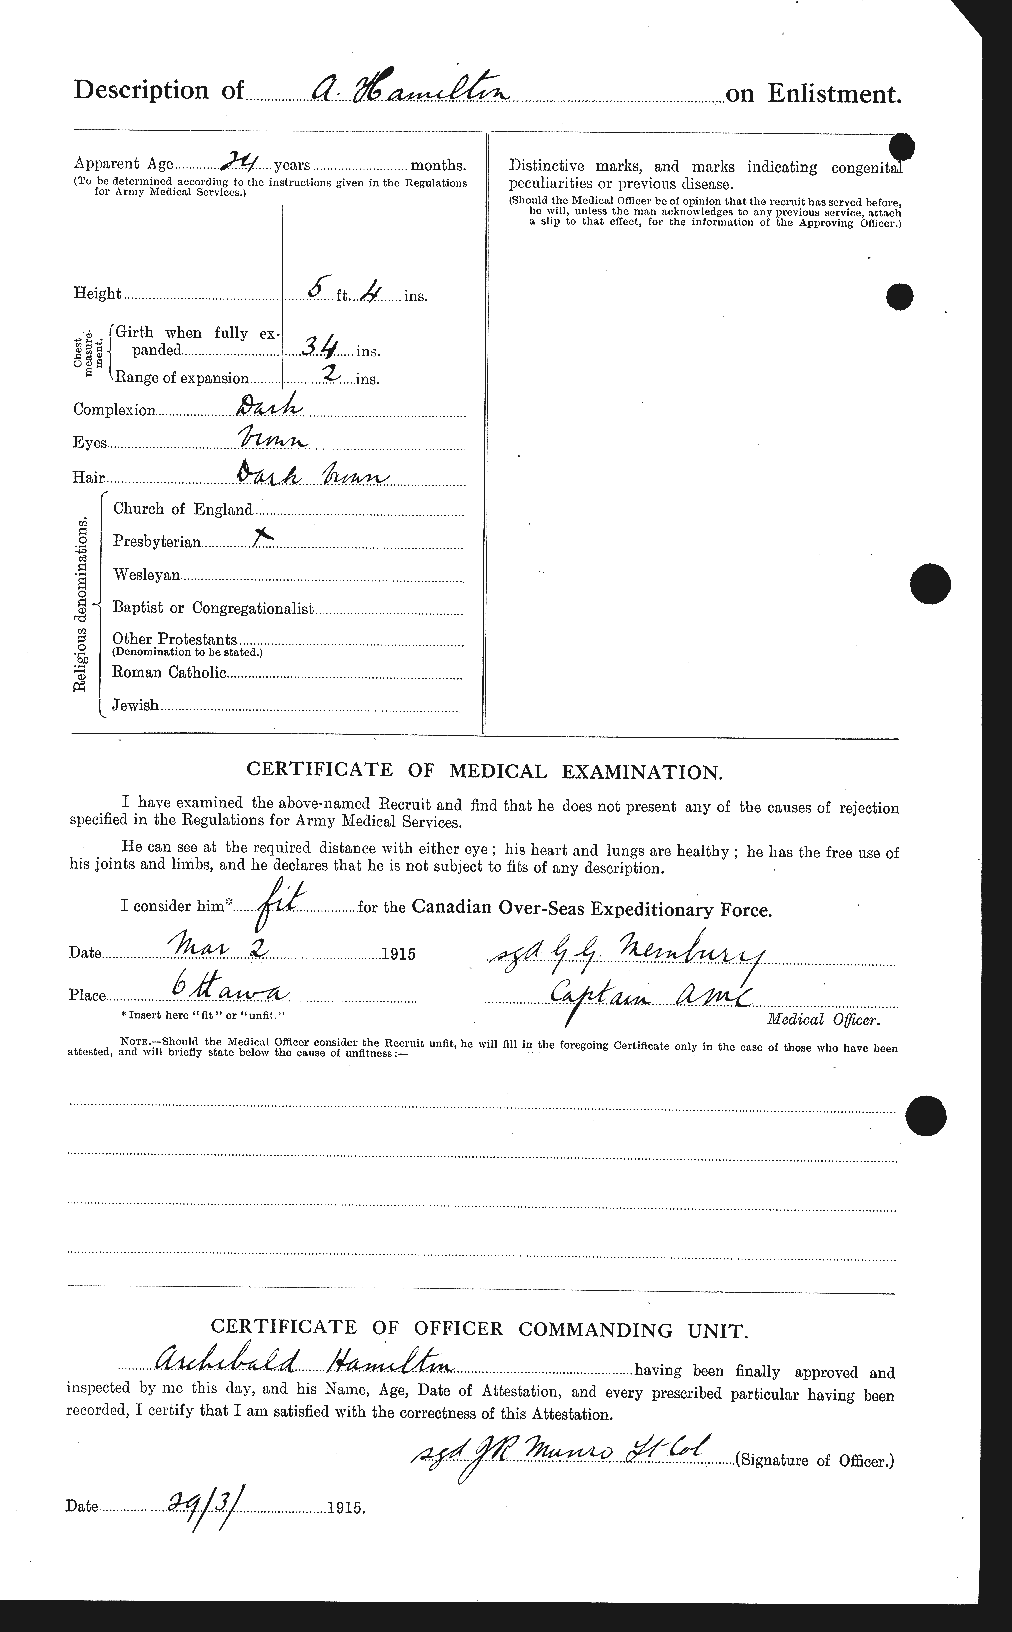 Personnel Records of the First World War - CEF 375243b